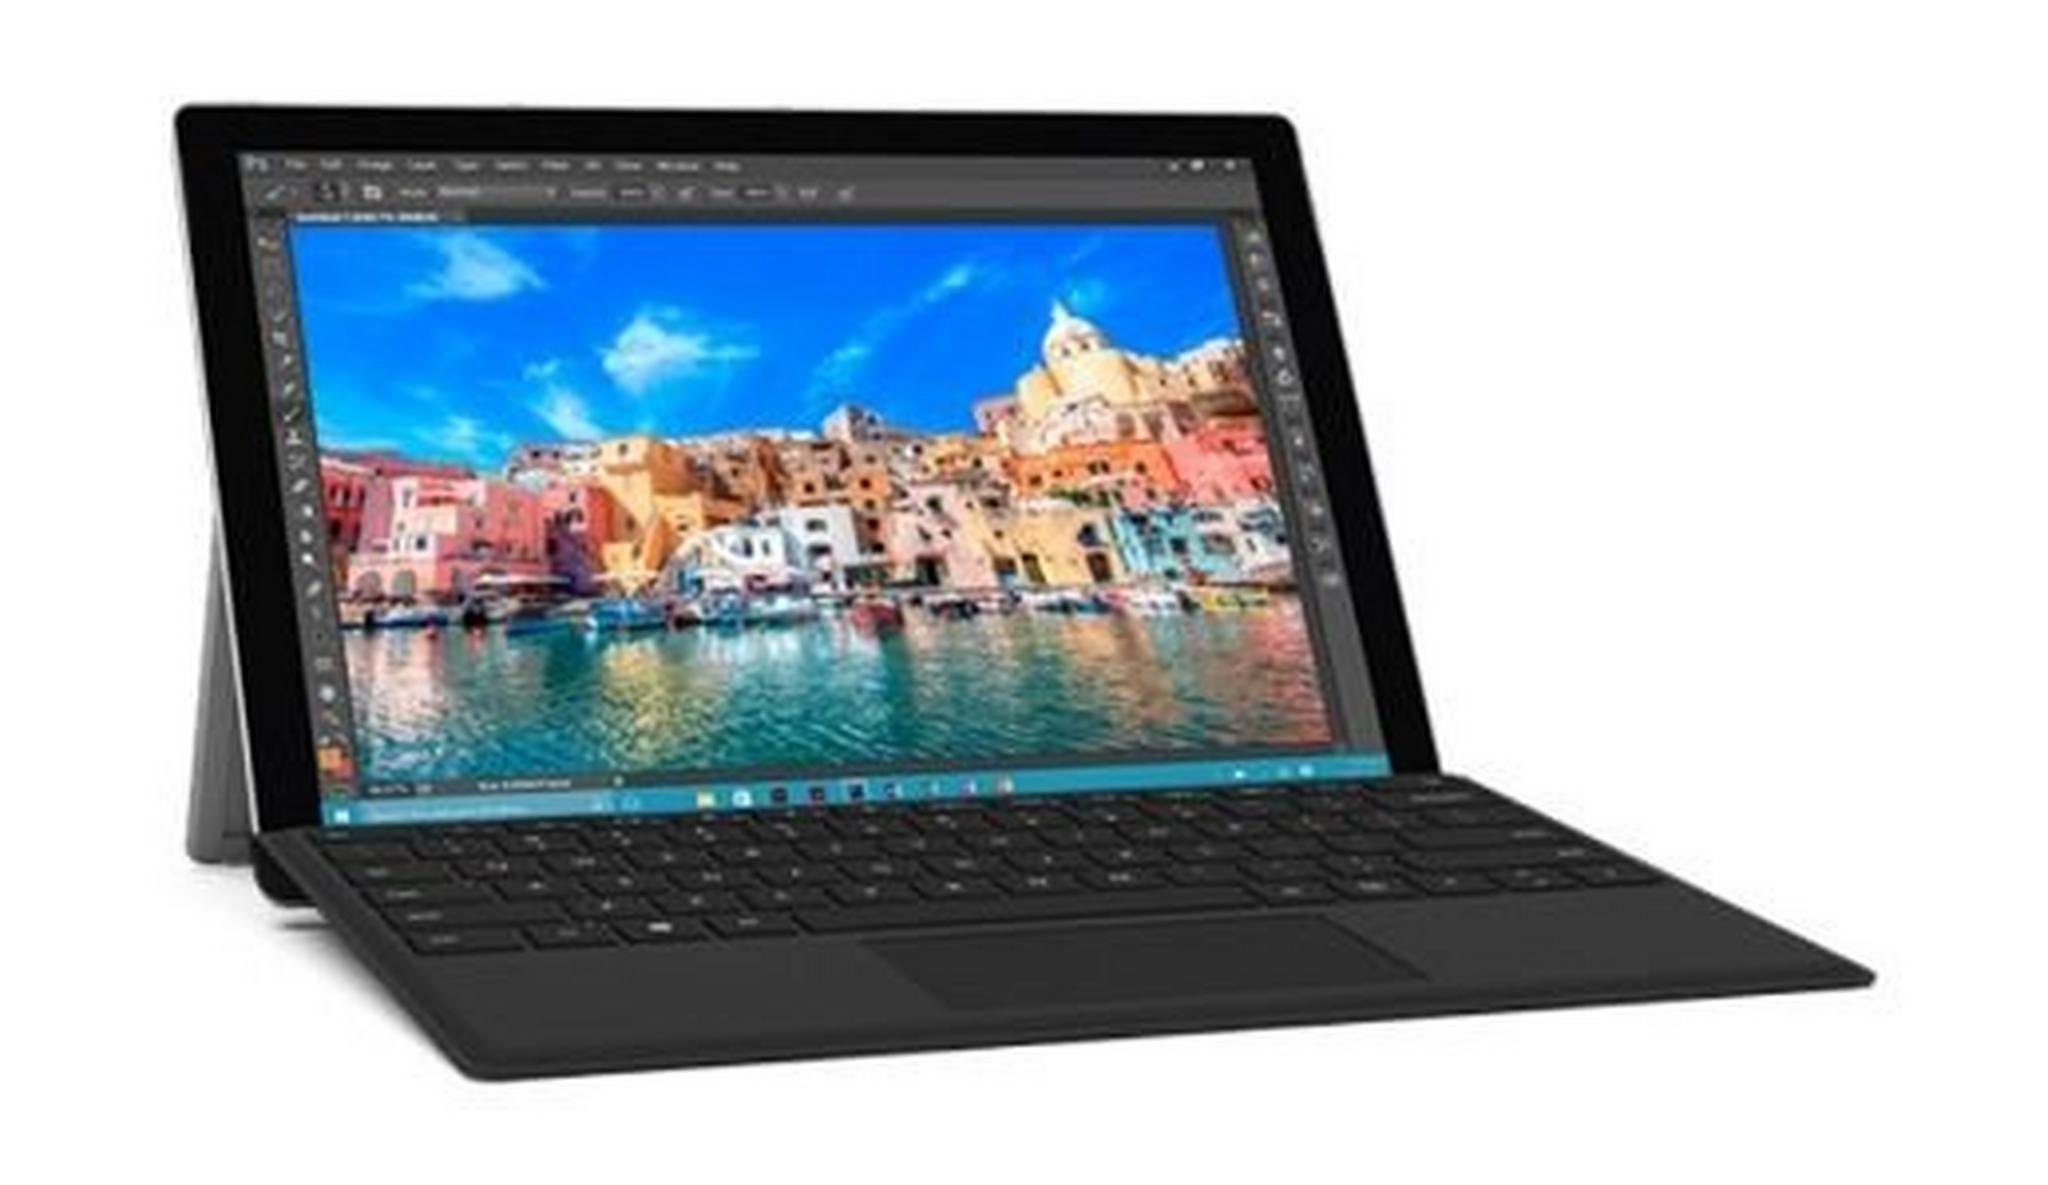 Microsoft Surface Pro 4 Type Cover Keyboard (R9Q-00001) - Black